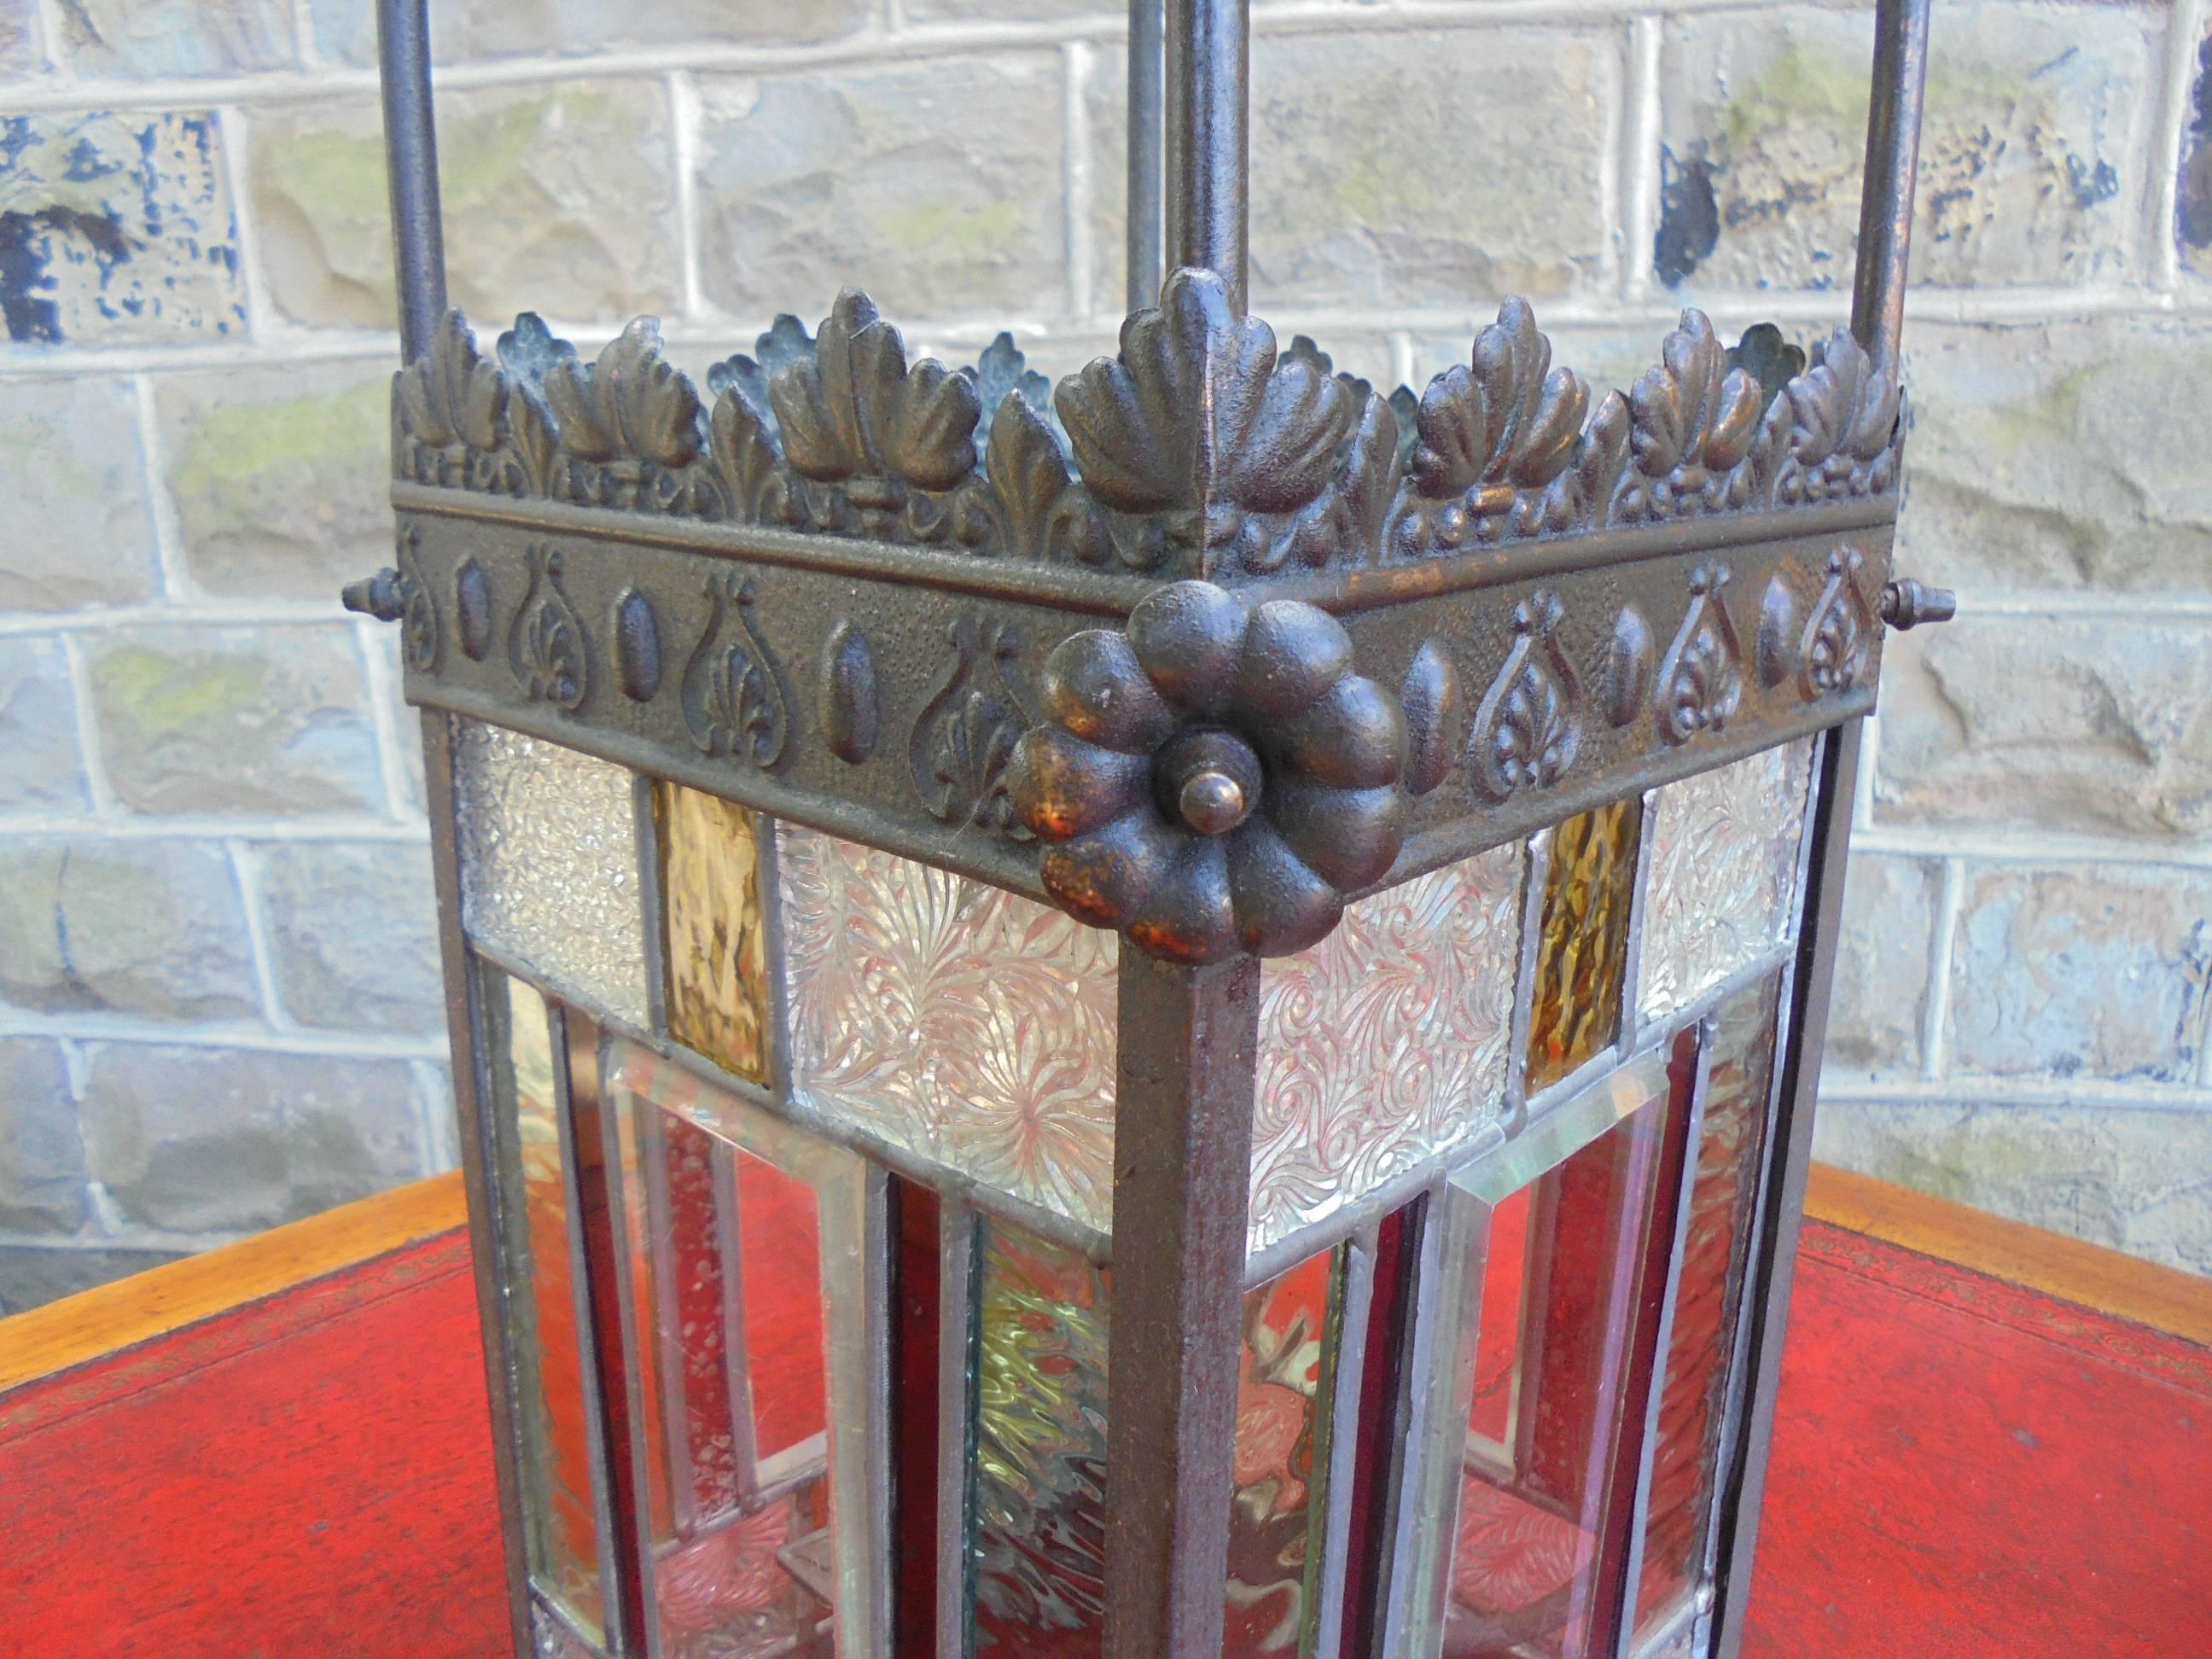 Offered for sale is this antique brass and colored glass hanging lantern.

Victorian, having embossed brass frame which has nice verdigris patination. Plain and color glass leaded panels Originally would have been a gas lamp, still retains its